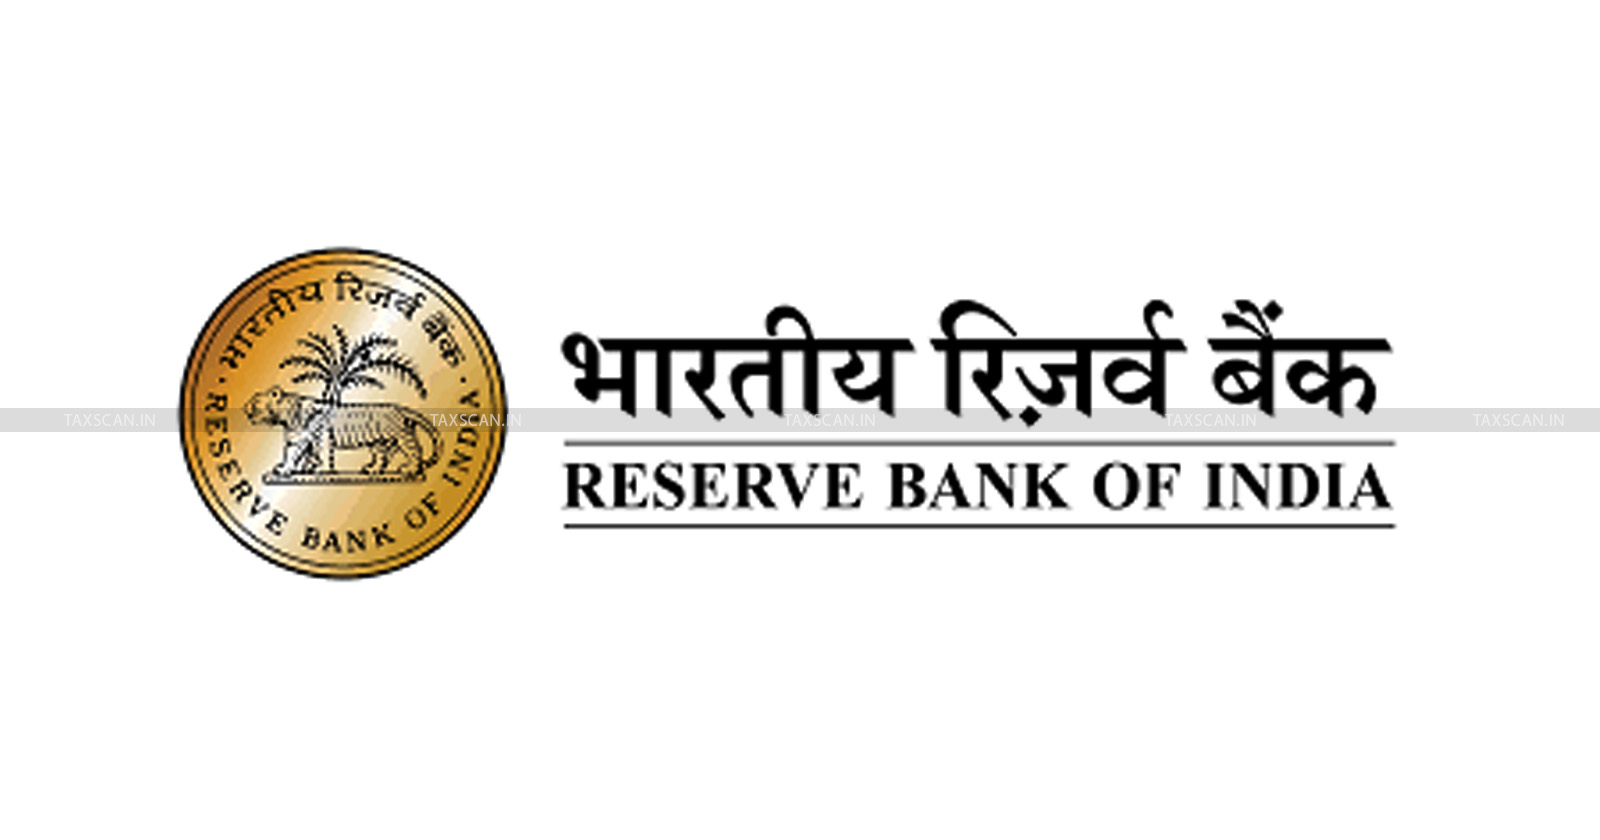 RBI - Reserve Bank Of India - RBI guidelines for Auditors - Appointment of Auditors in Co-Operative Banks - Re-appointment of Statutory Auditors - Taxscan